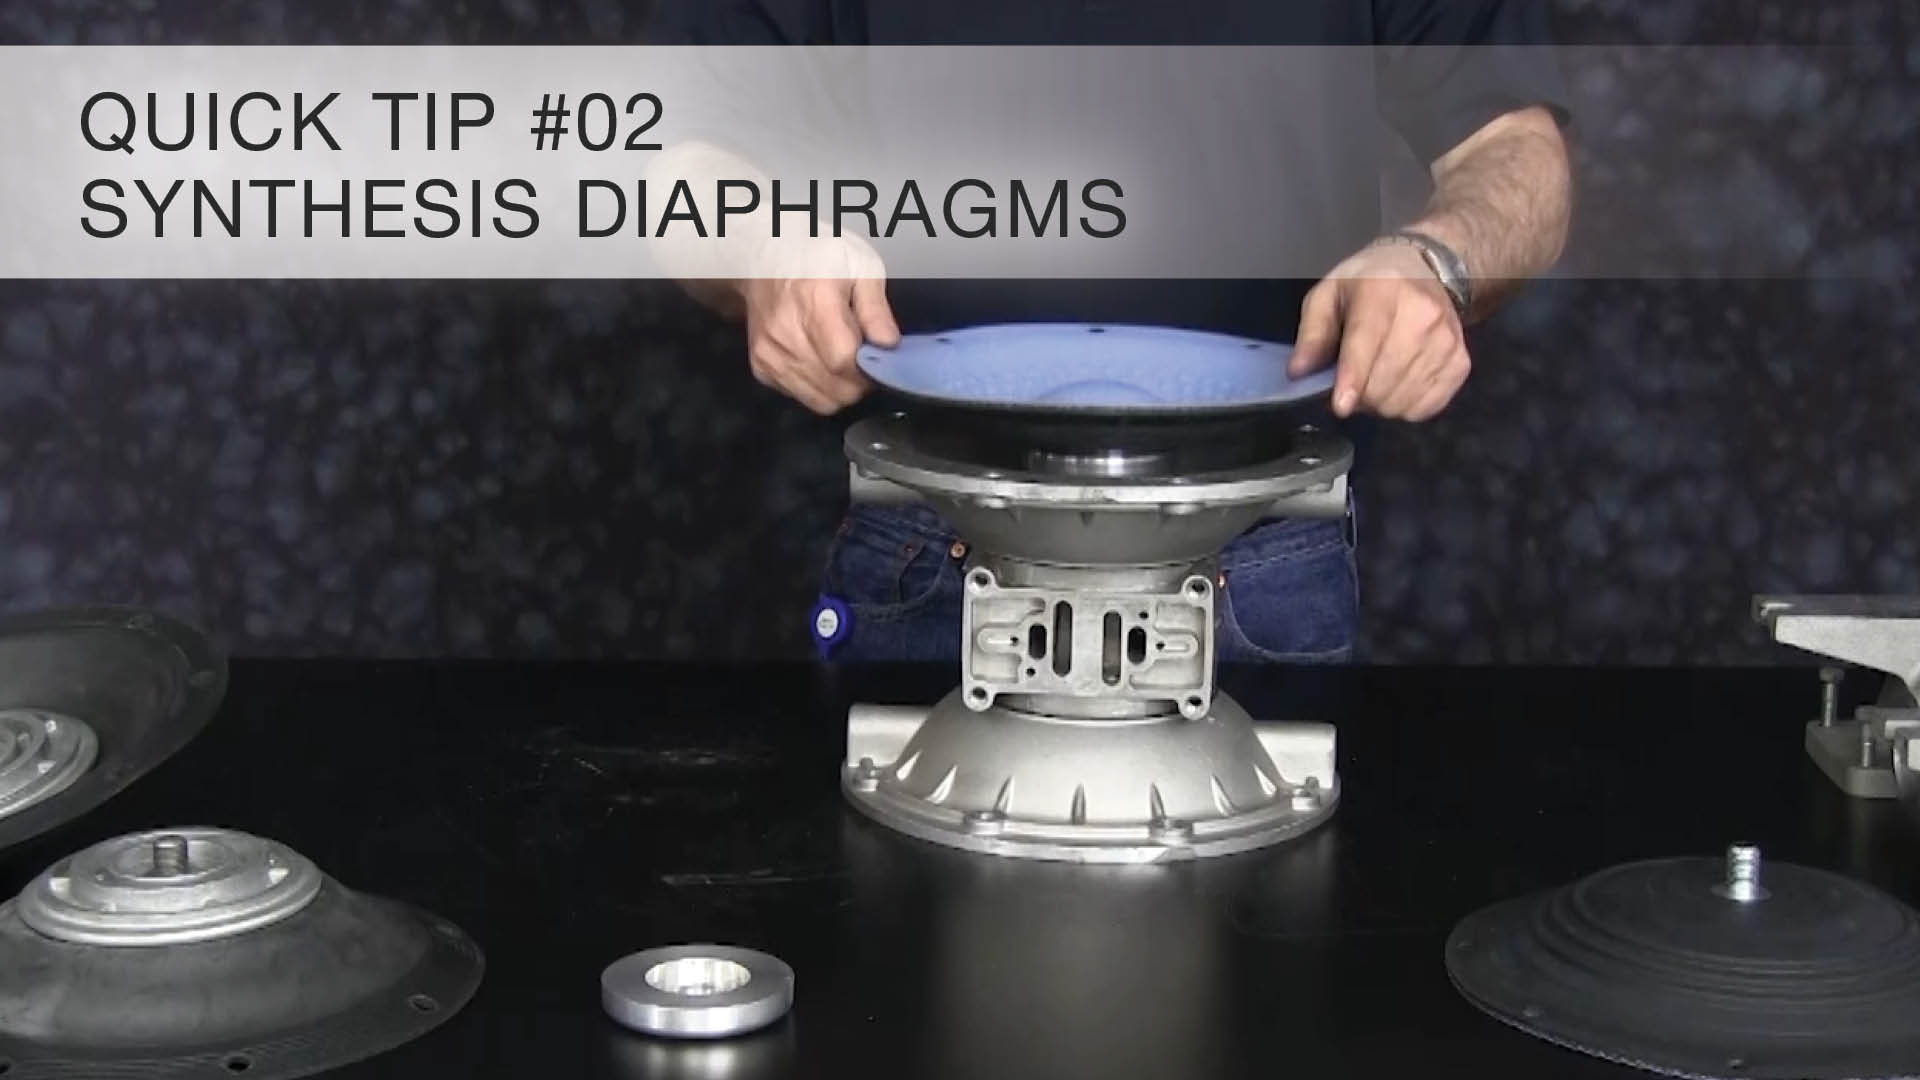 Quick Tip #02 - Synthesis Diaphragms